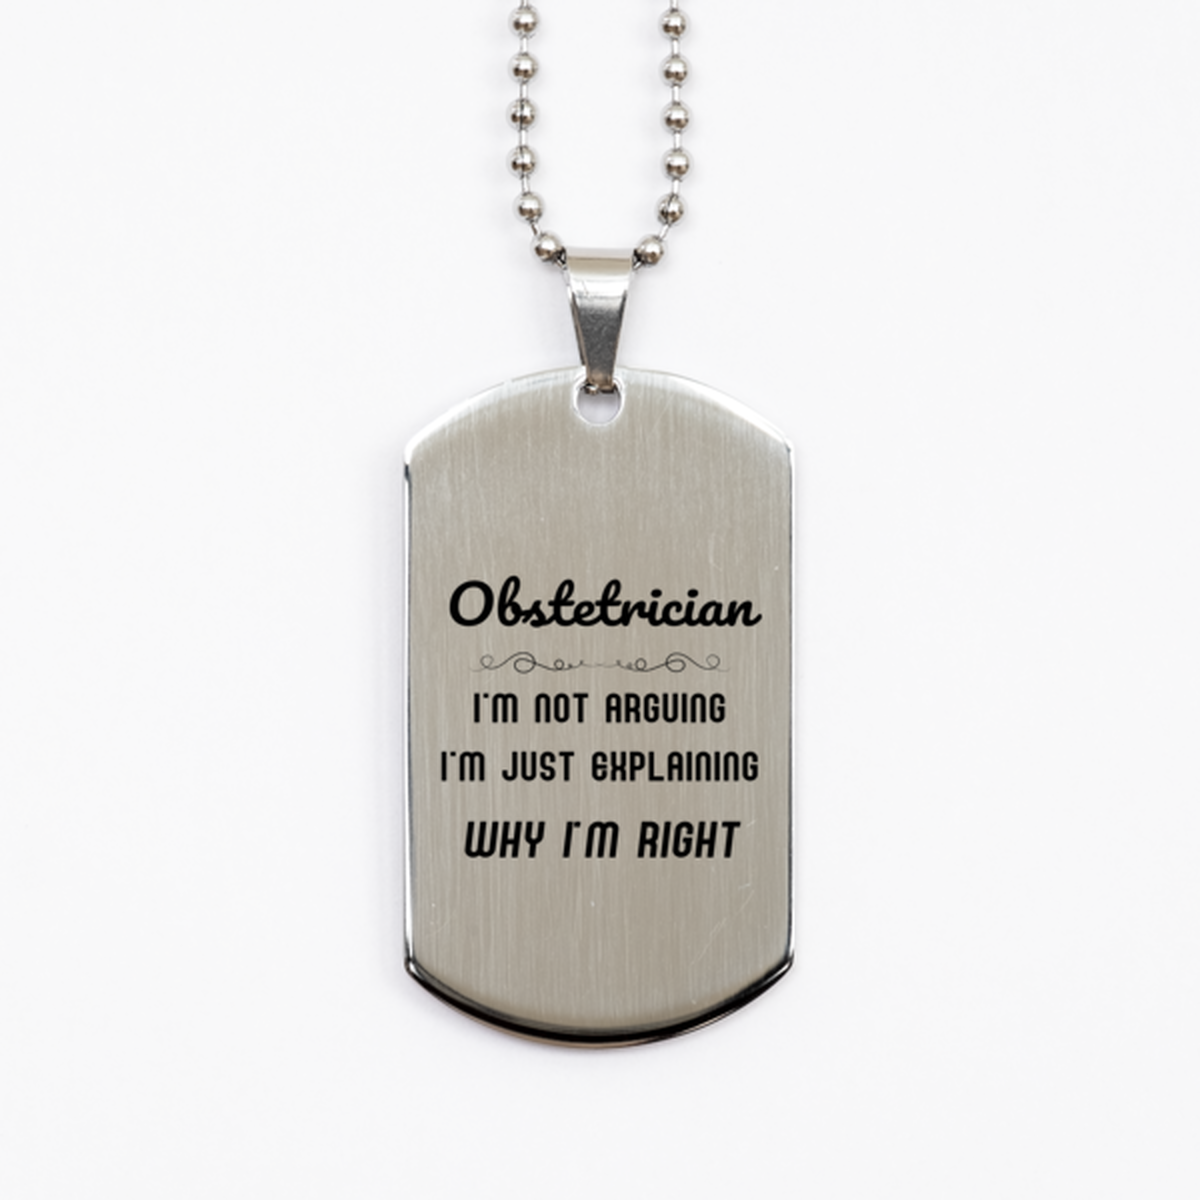 Obstetrician I'm not Arguing. I'm Just Explaining Why I'm RIGHT Silver Dog Tag, Funny Saying Quote Obstetrician Gifts For Obstetrician Graduation Birthday Christmas Gifts for Men Women Coworker